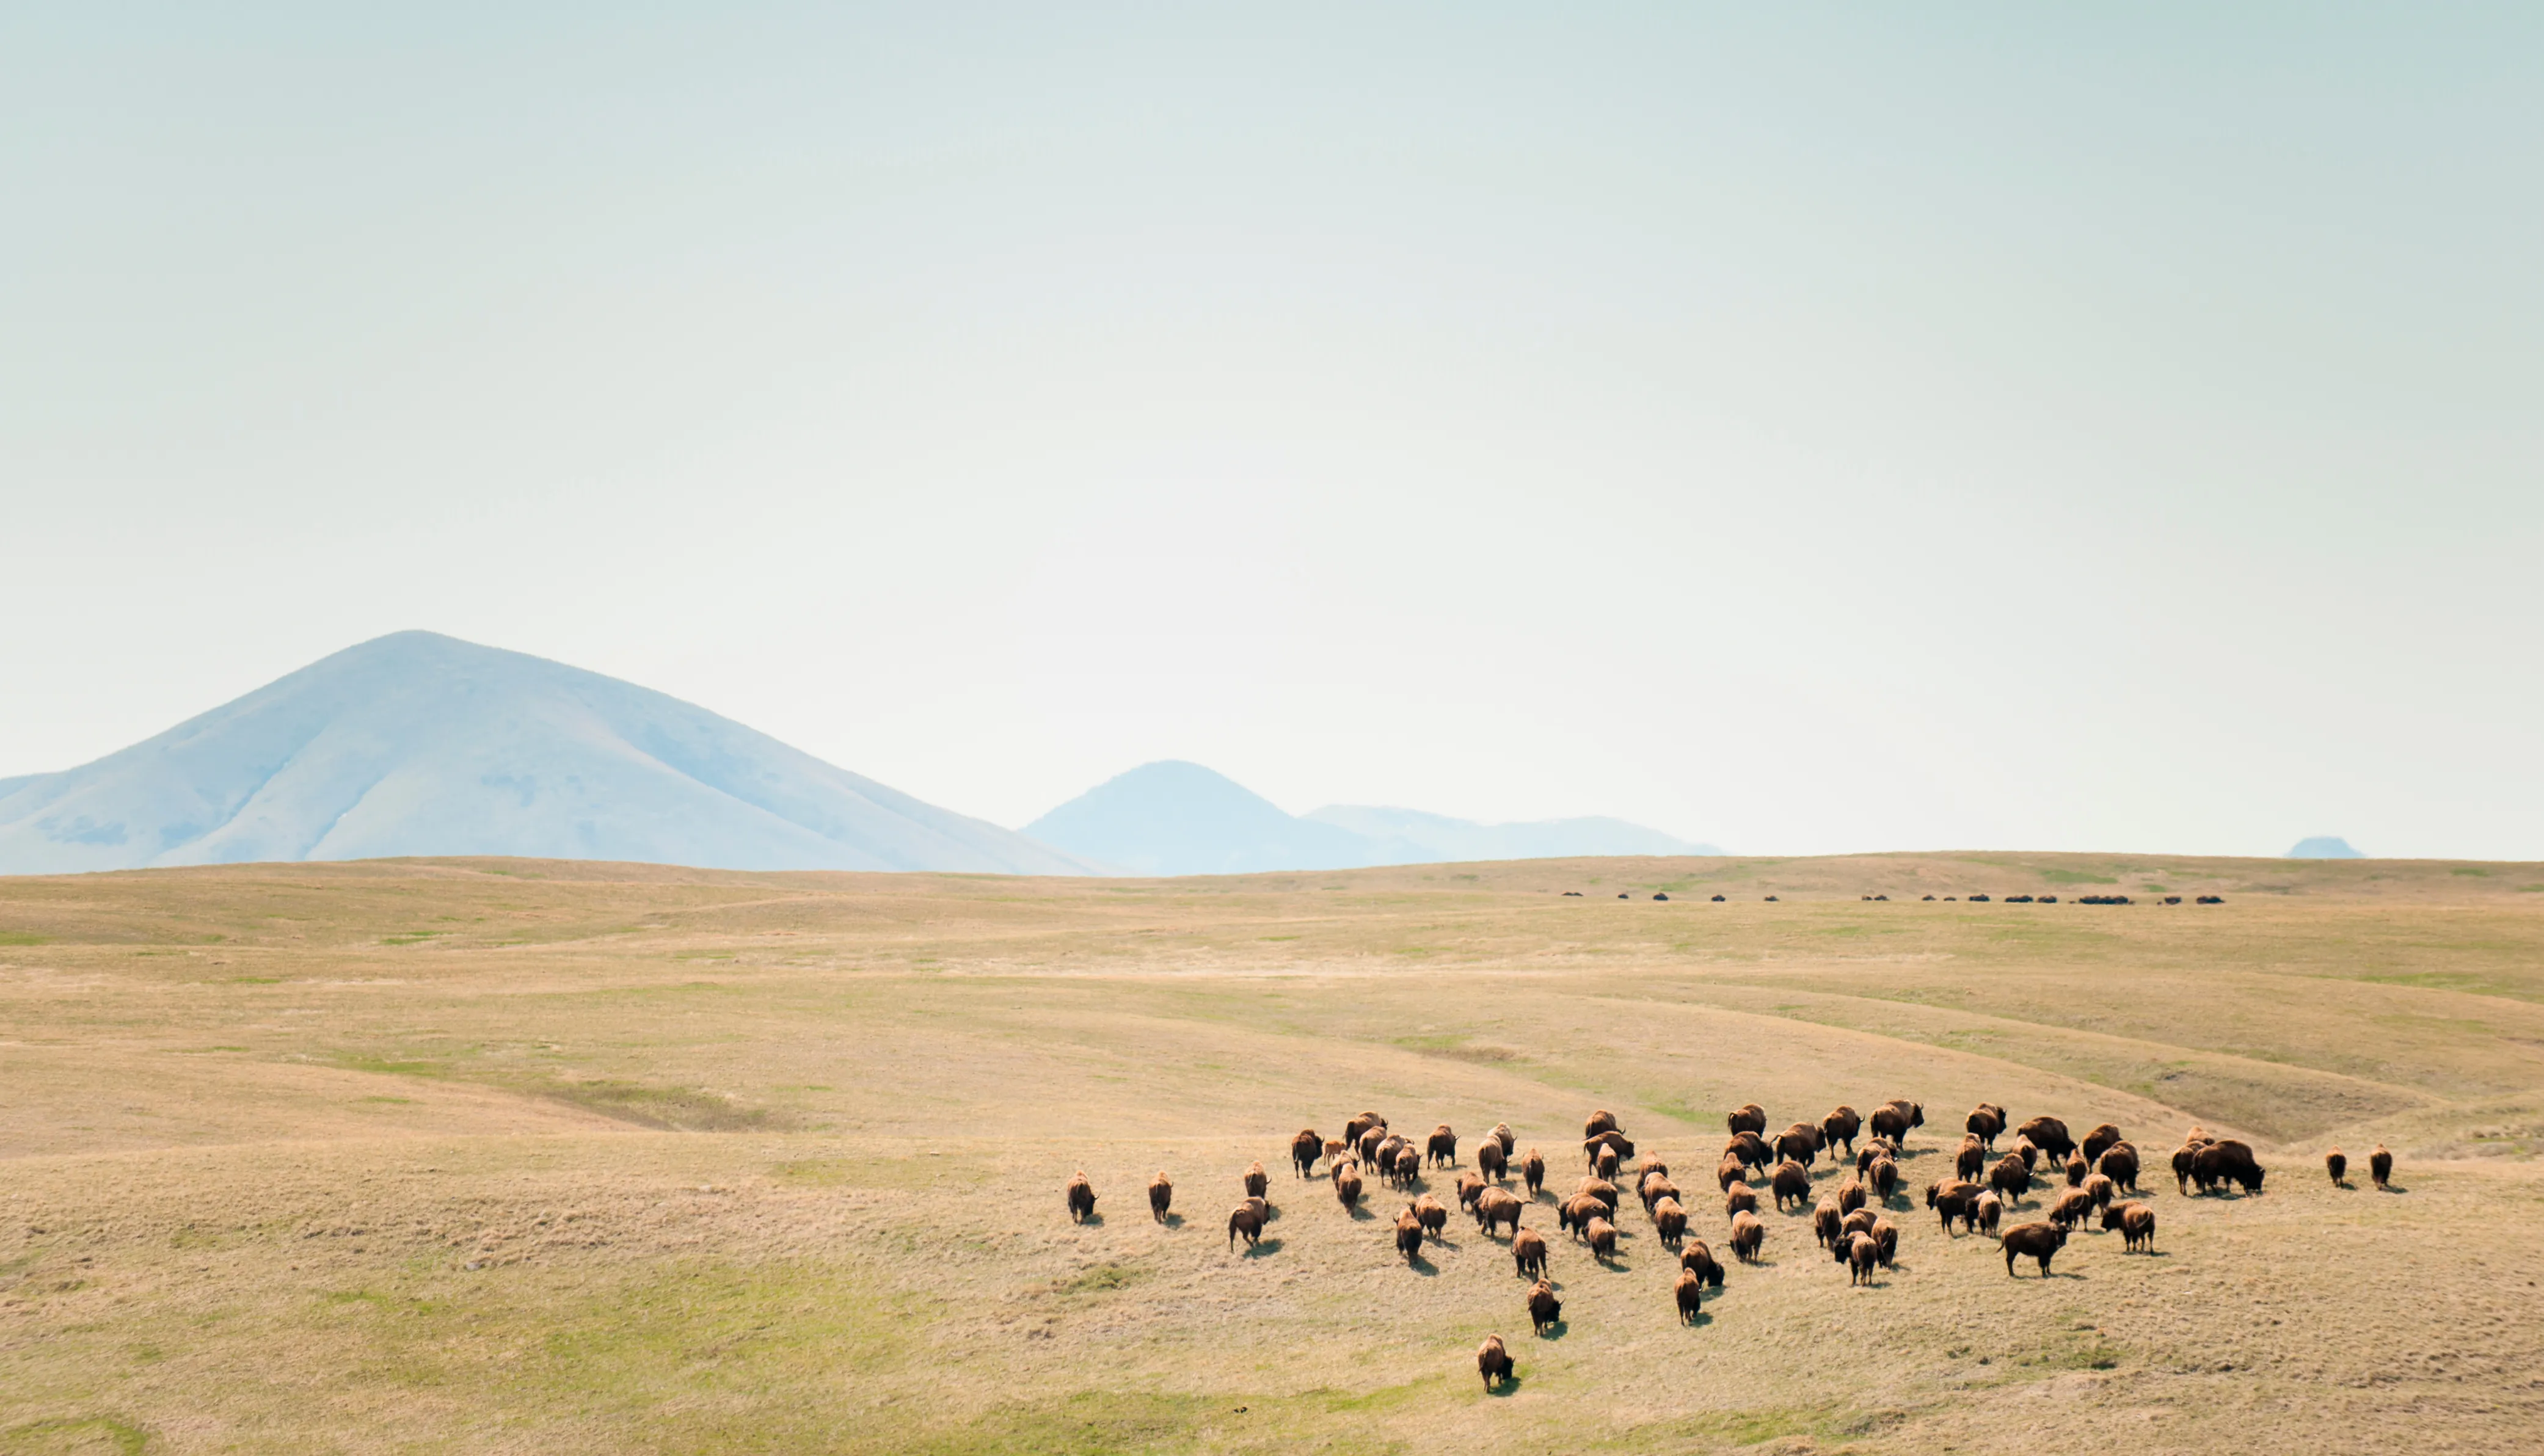 A dramatic landscape of bison-filled grasslands with a mountain range in the distance